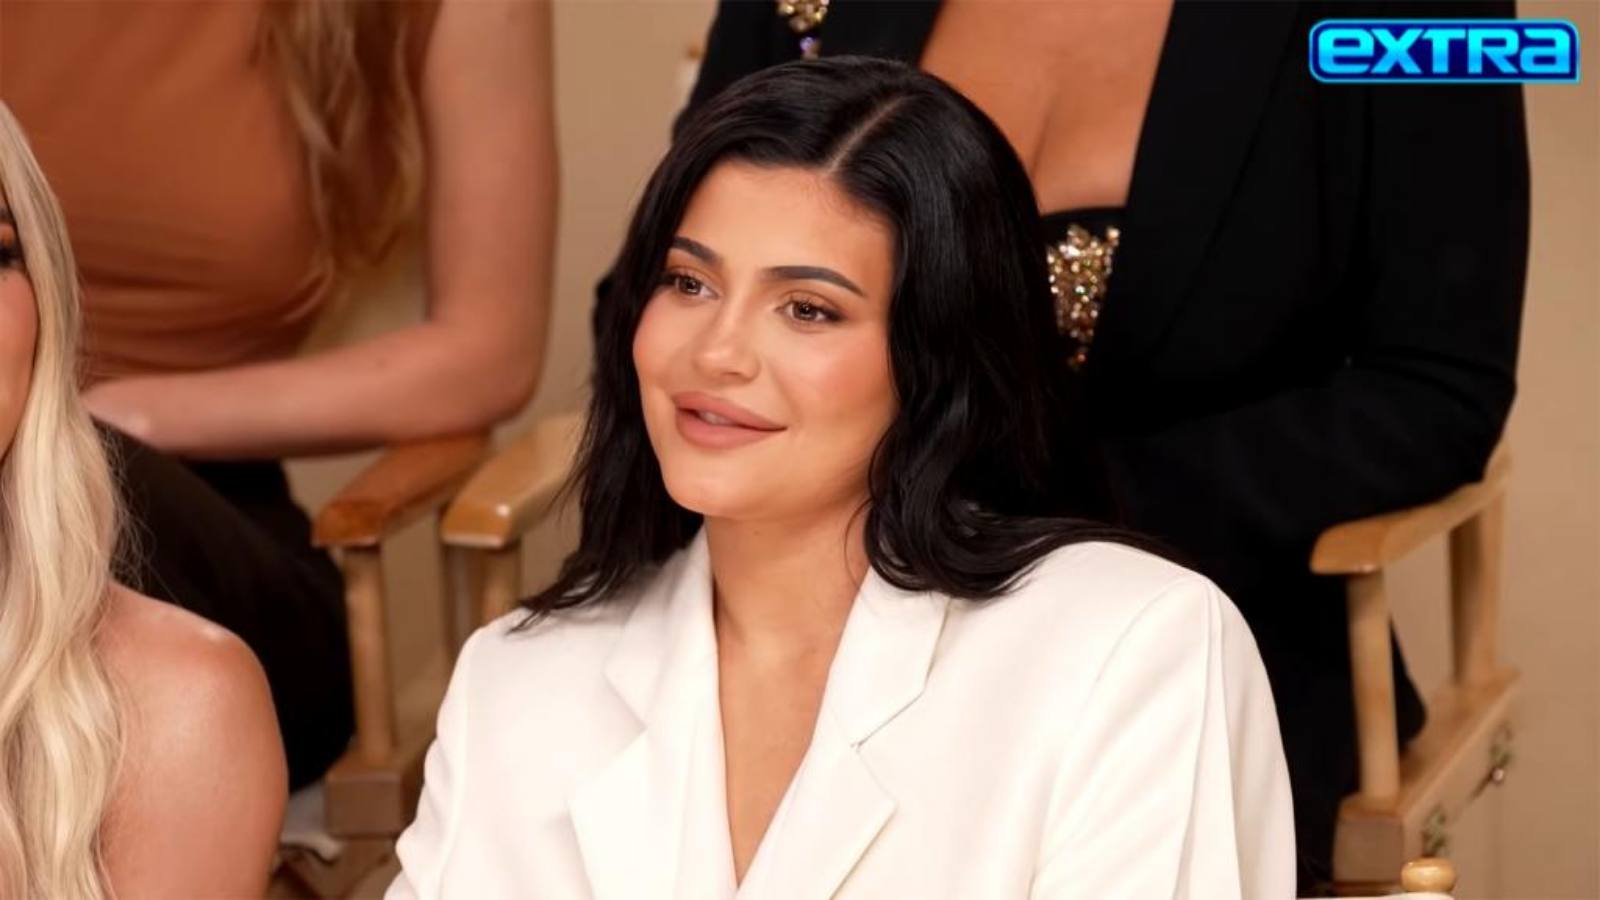 Kylie Jenner not ready to reveal the new name of her son